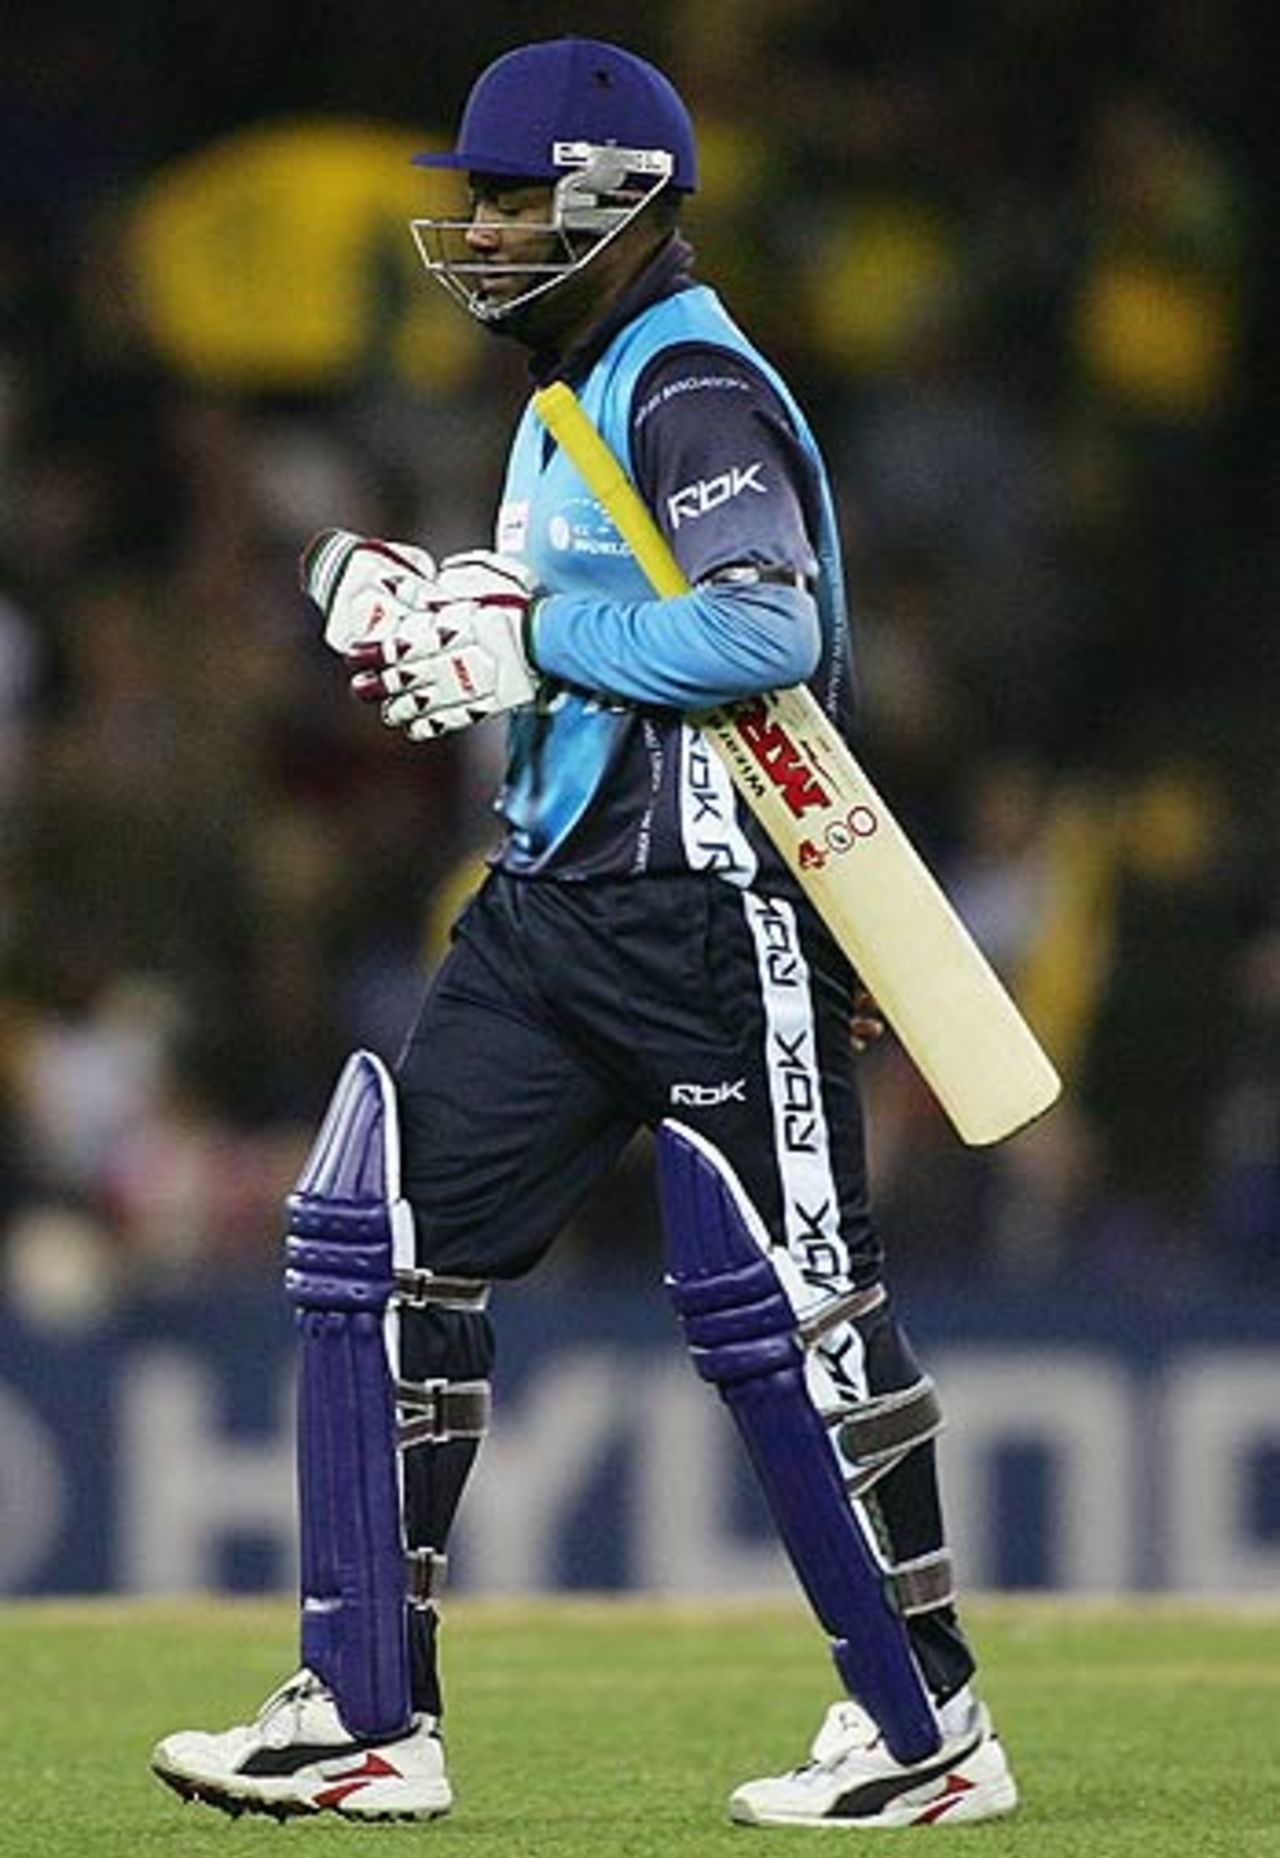 Brian Lara was dismissed for a first-ball duck, Australia v World XI, 3rd ODI, Melbourne, October 9, 2005